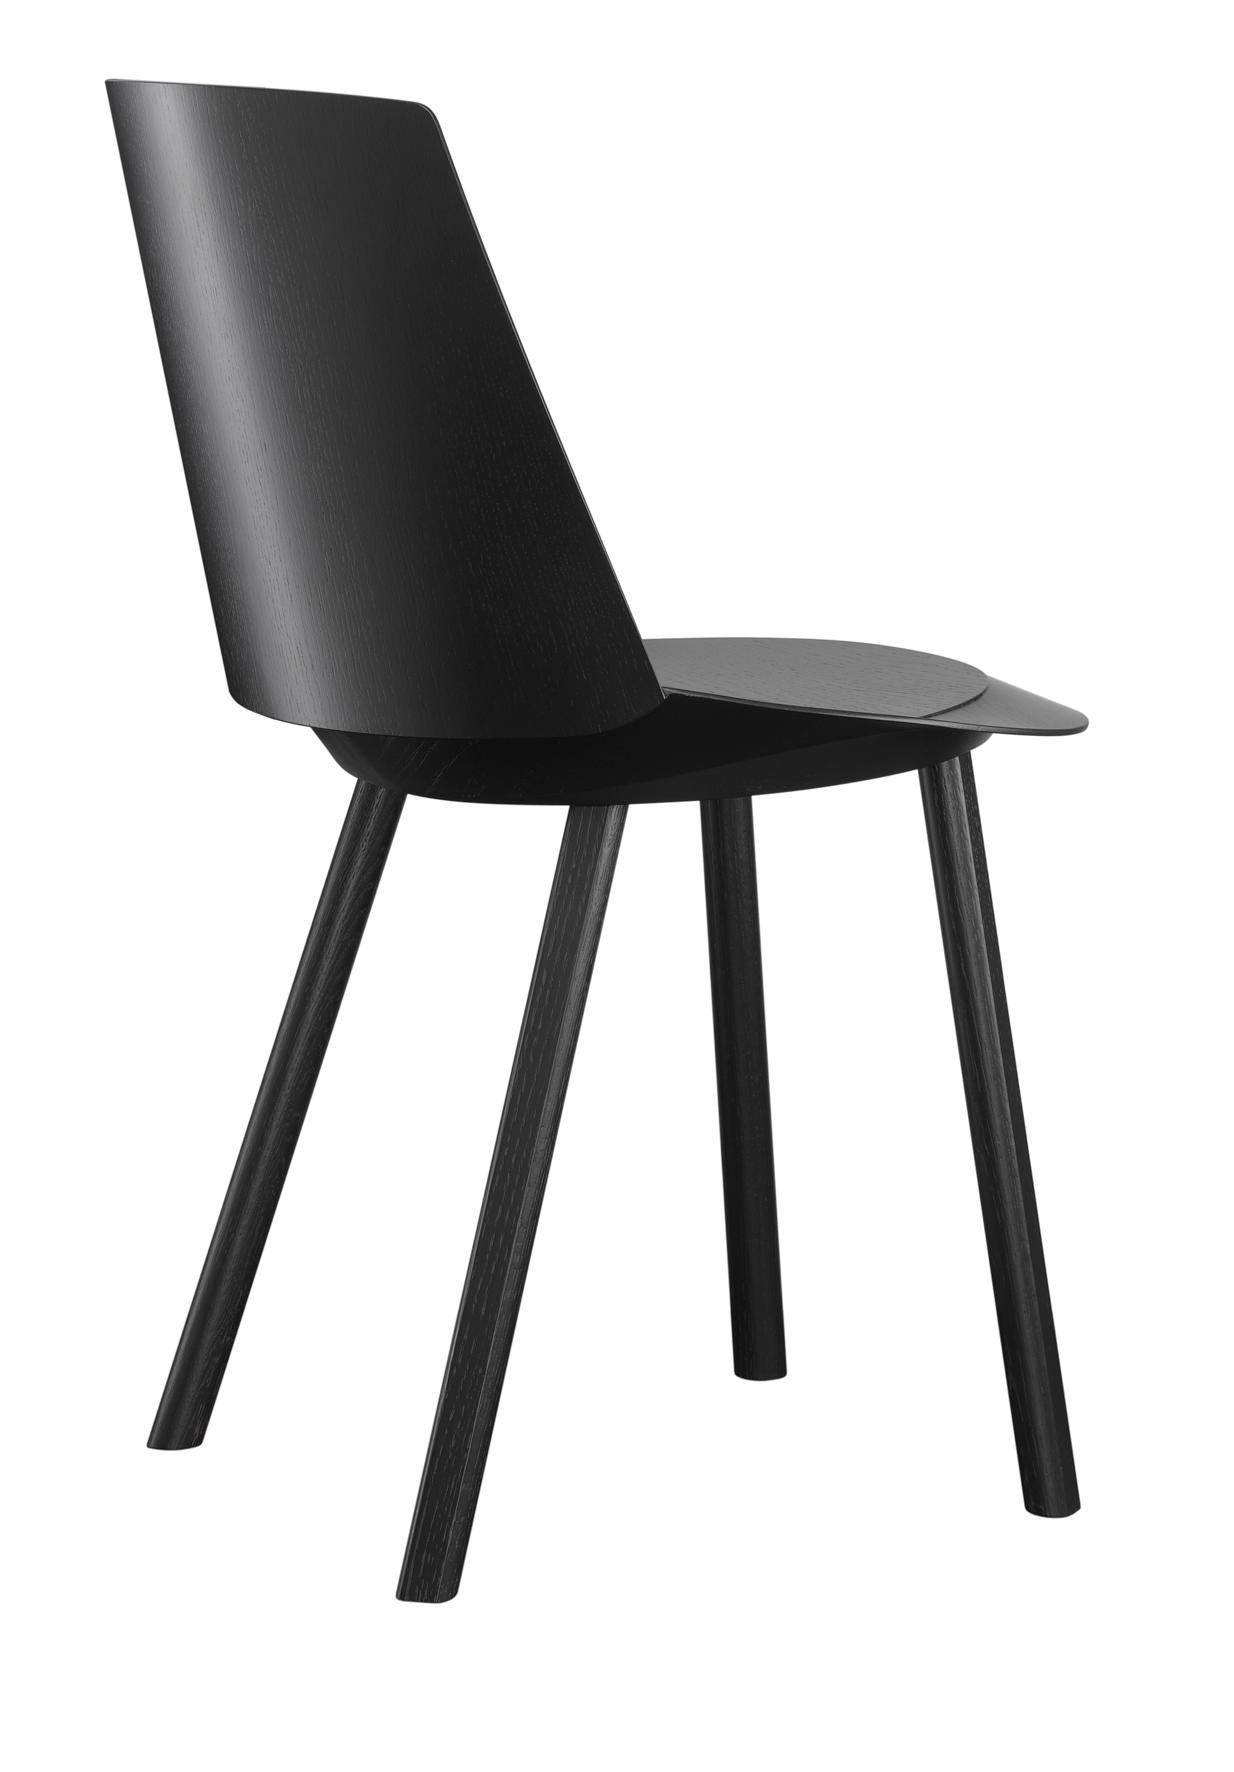 For Sale: Black (Jet Black Lacquer) e15 Customizable Houdini Side Chair by Stefan Diez